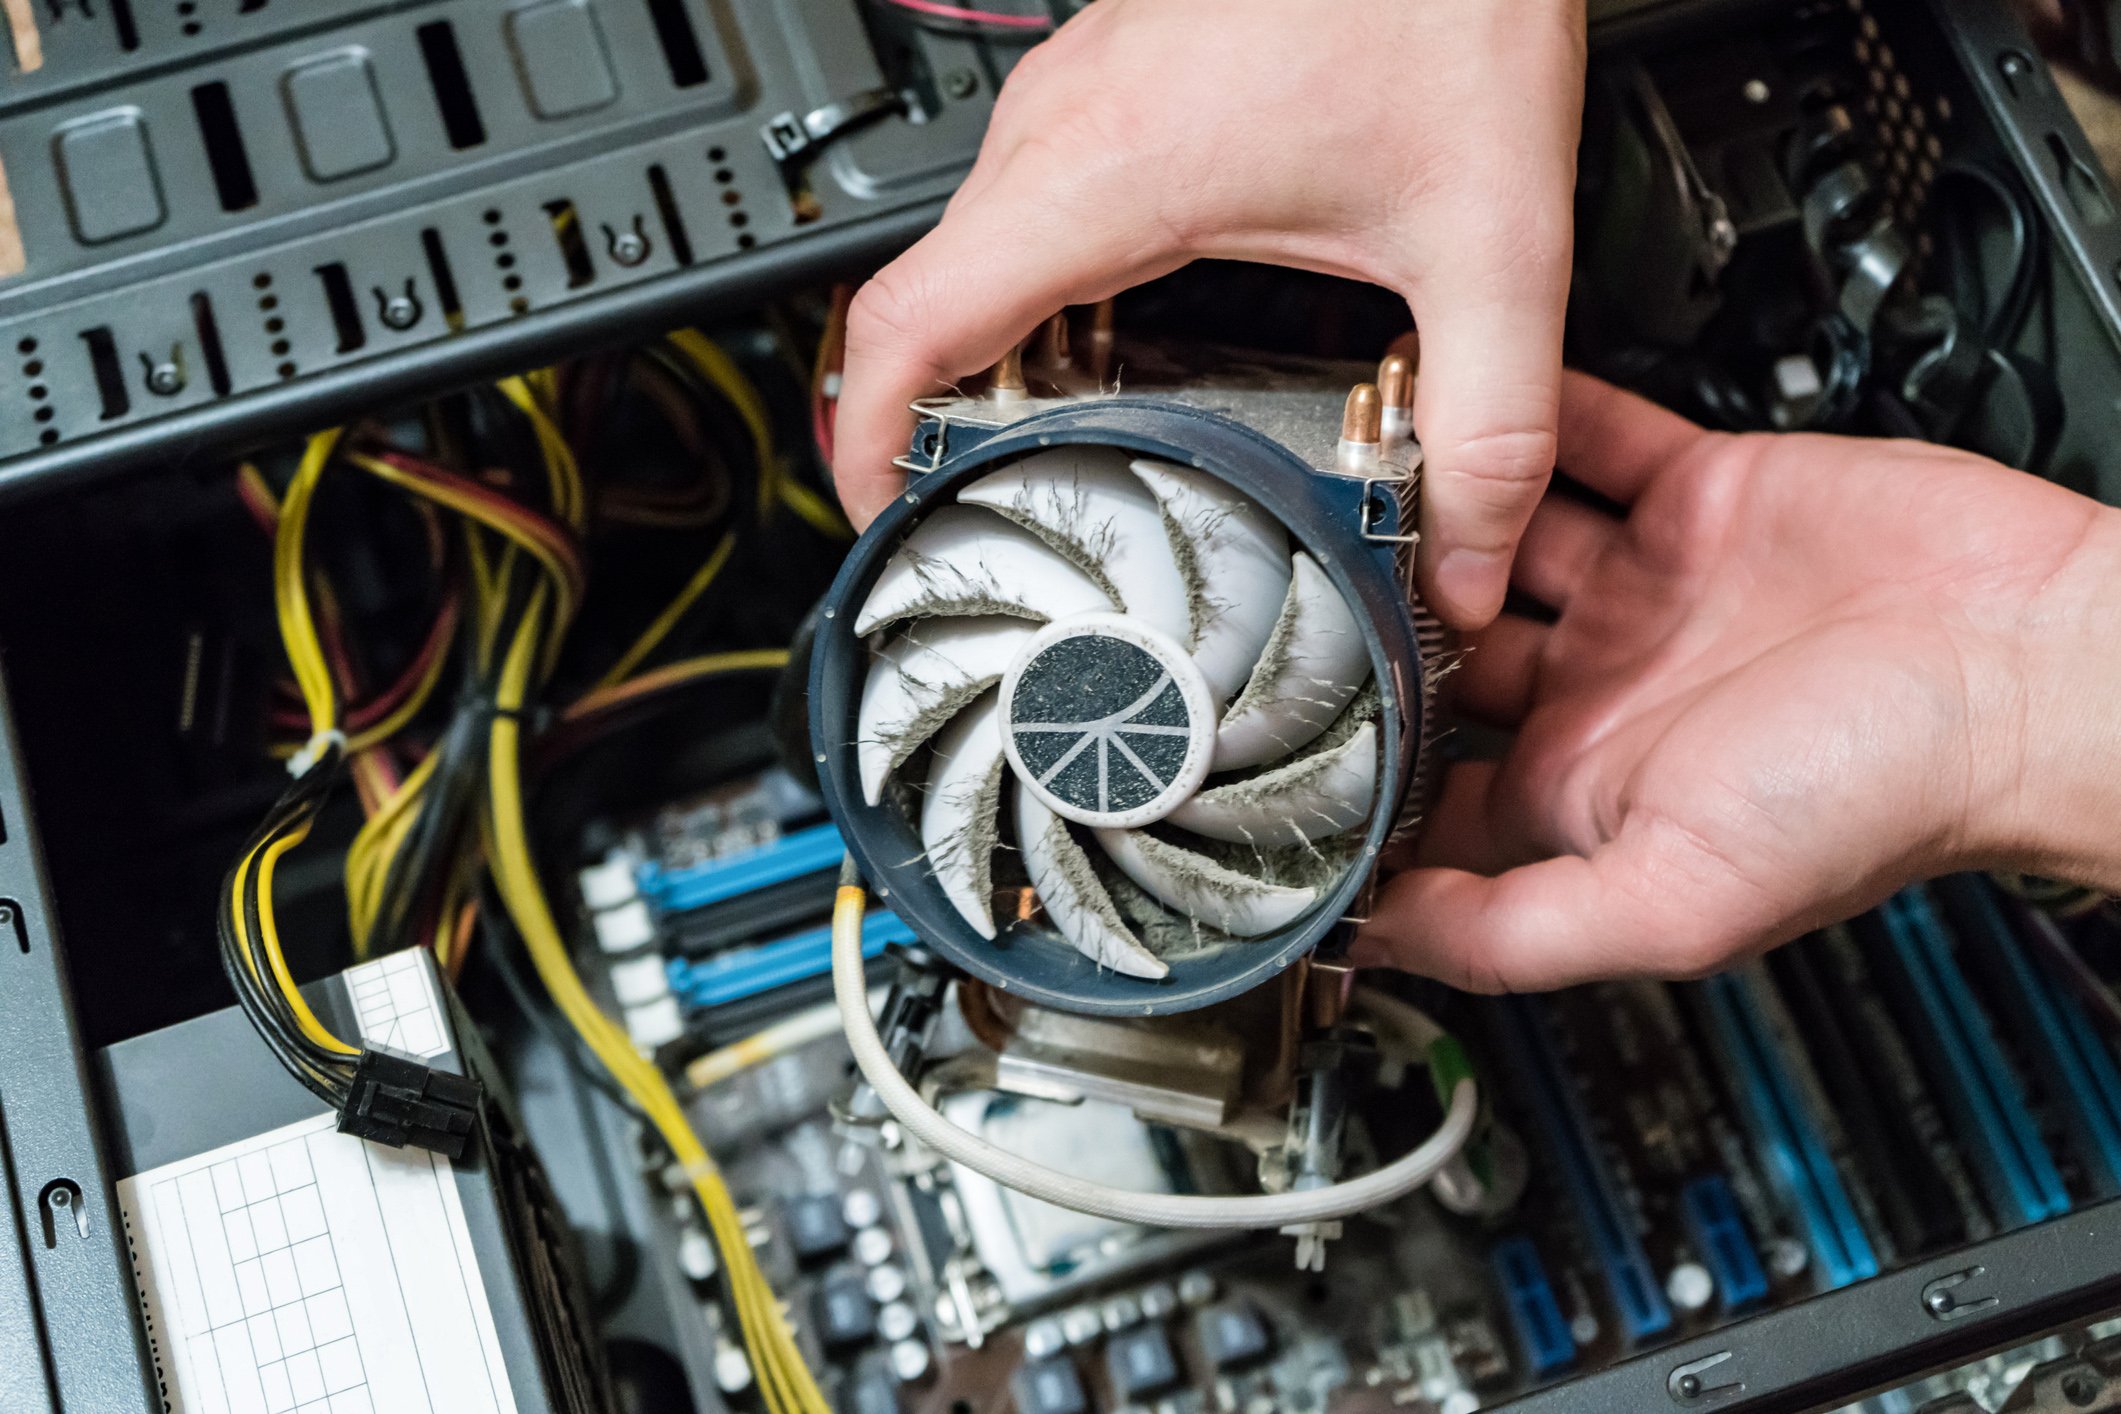 Ensure proper ventilation: Make sure your PC has enough space around it for proper airflow.
Keep your PC clean: Dust and debris can accumulate over time and cause overheating. Regularly clean your PC using compressed air or a soft brush.